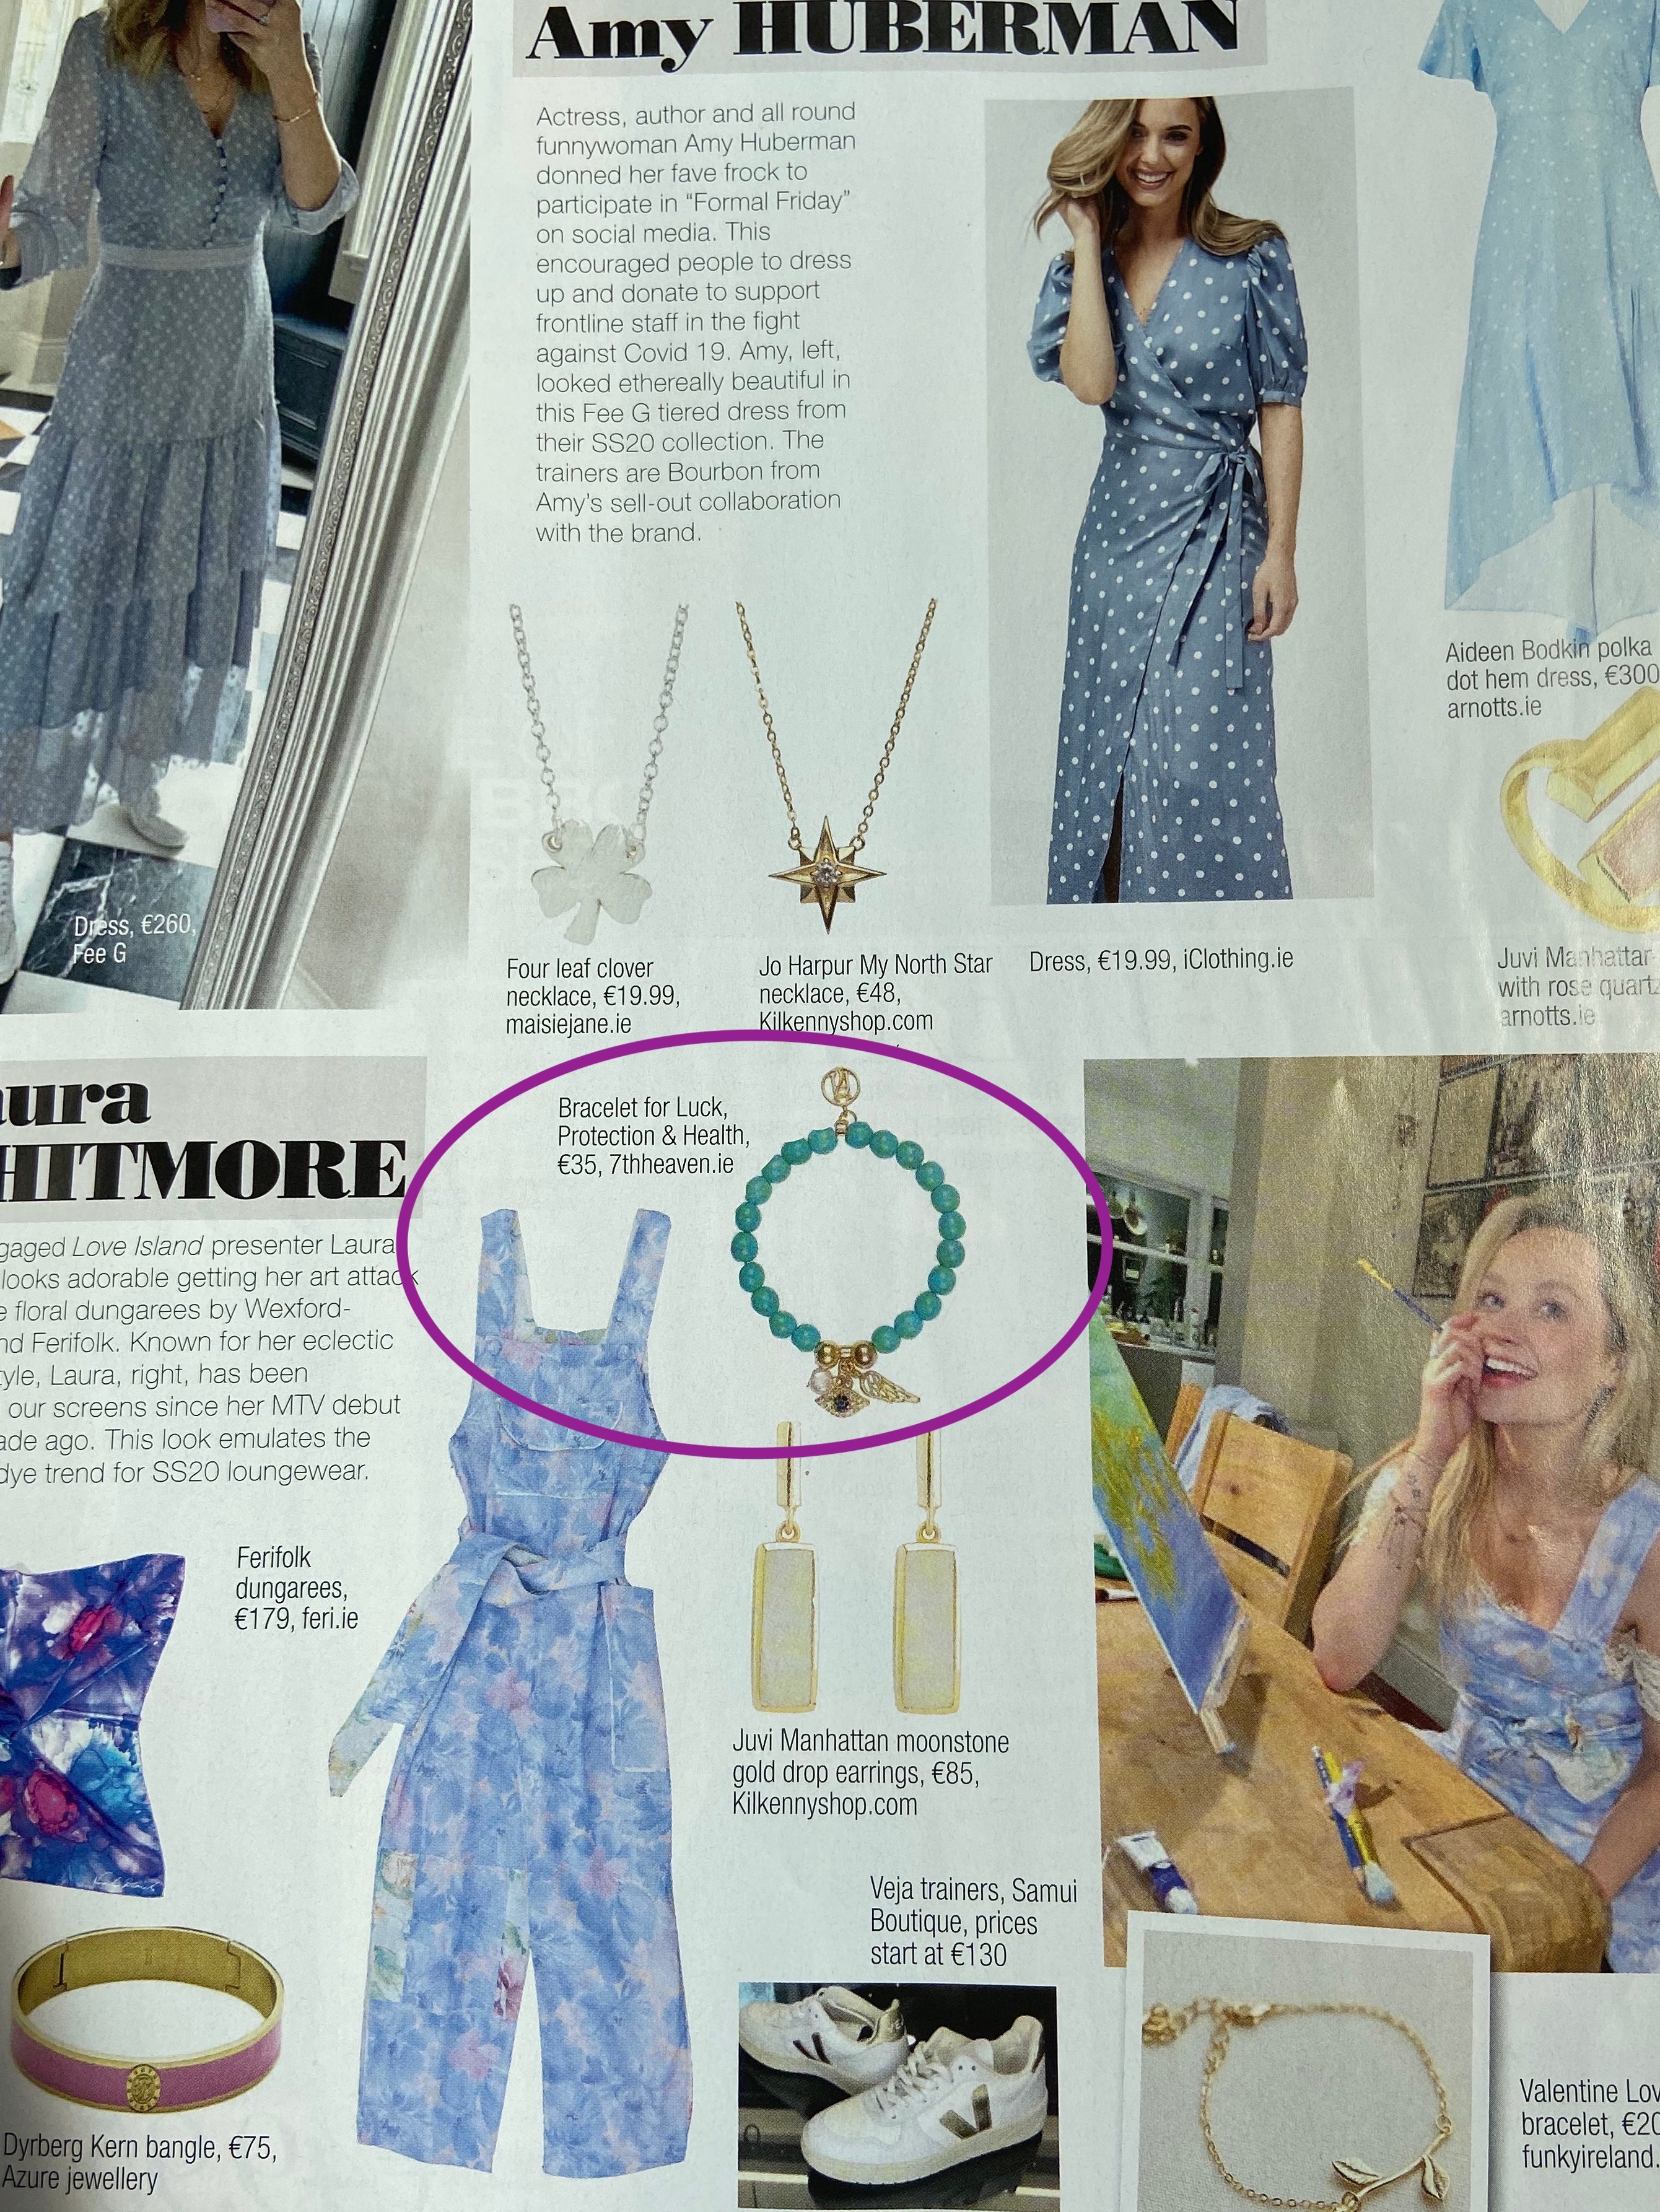 7th Heaven Jewellery as featured in RSVP magazine